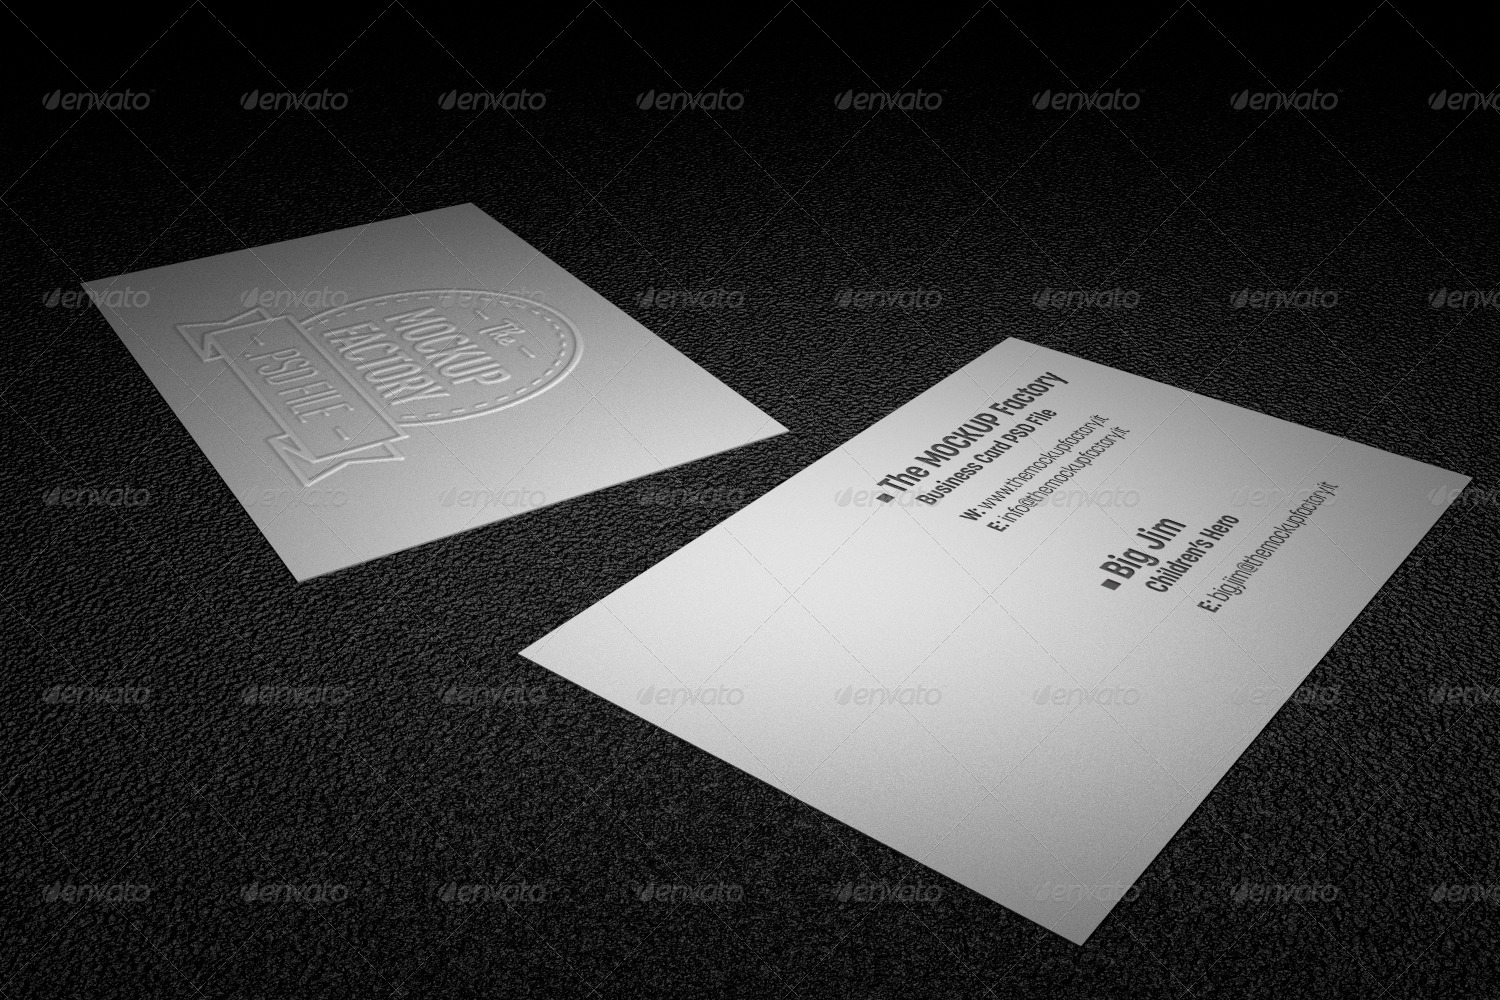 Download Photorealistic Embossed Business Card MockUp by ...